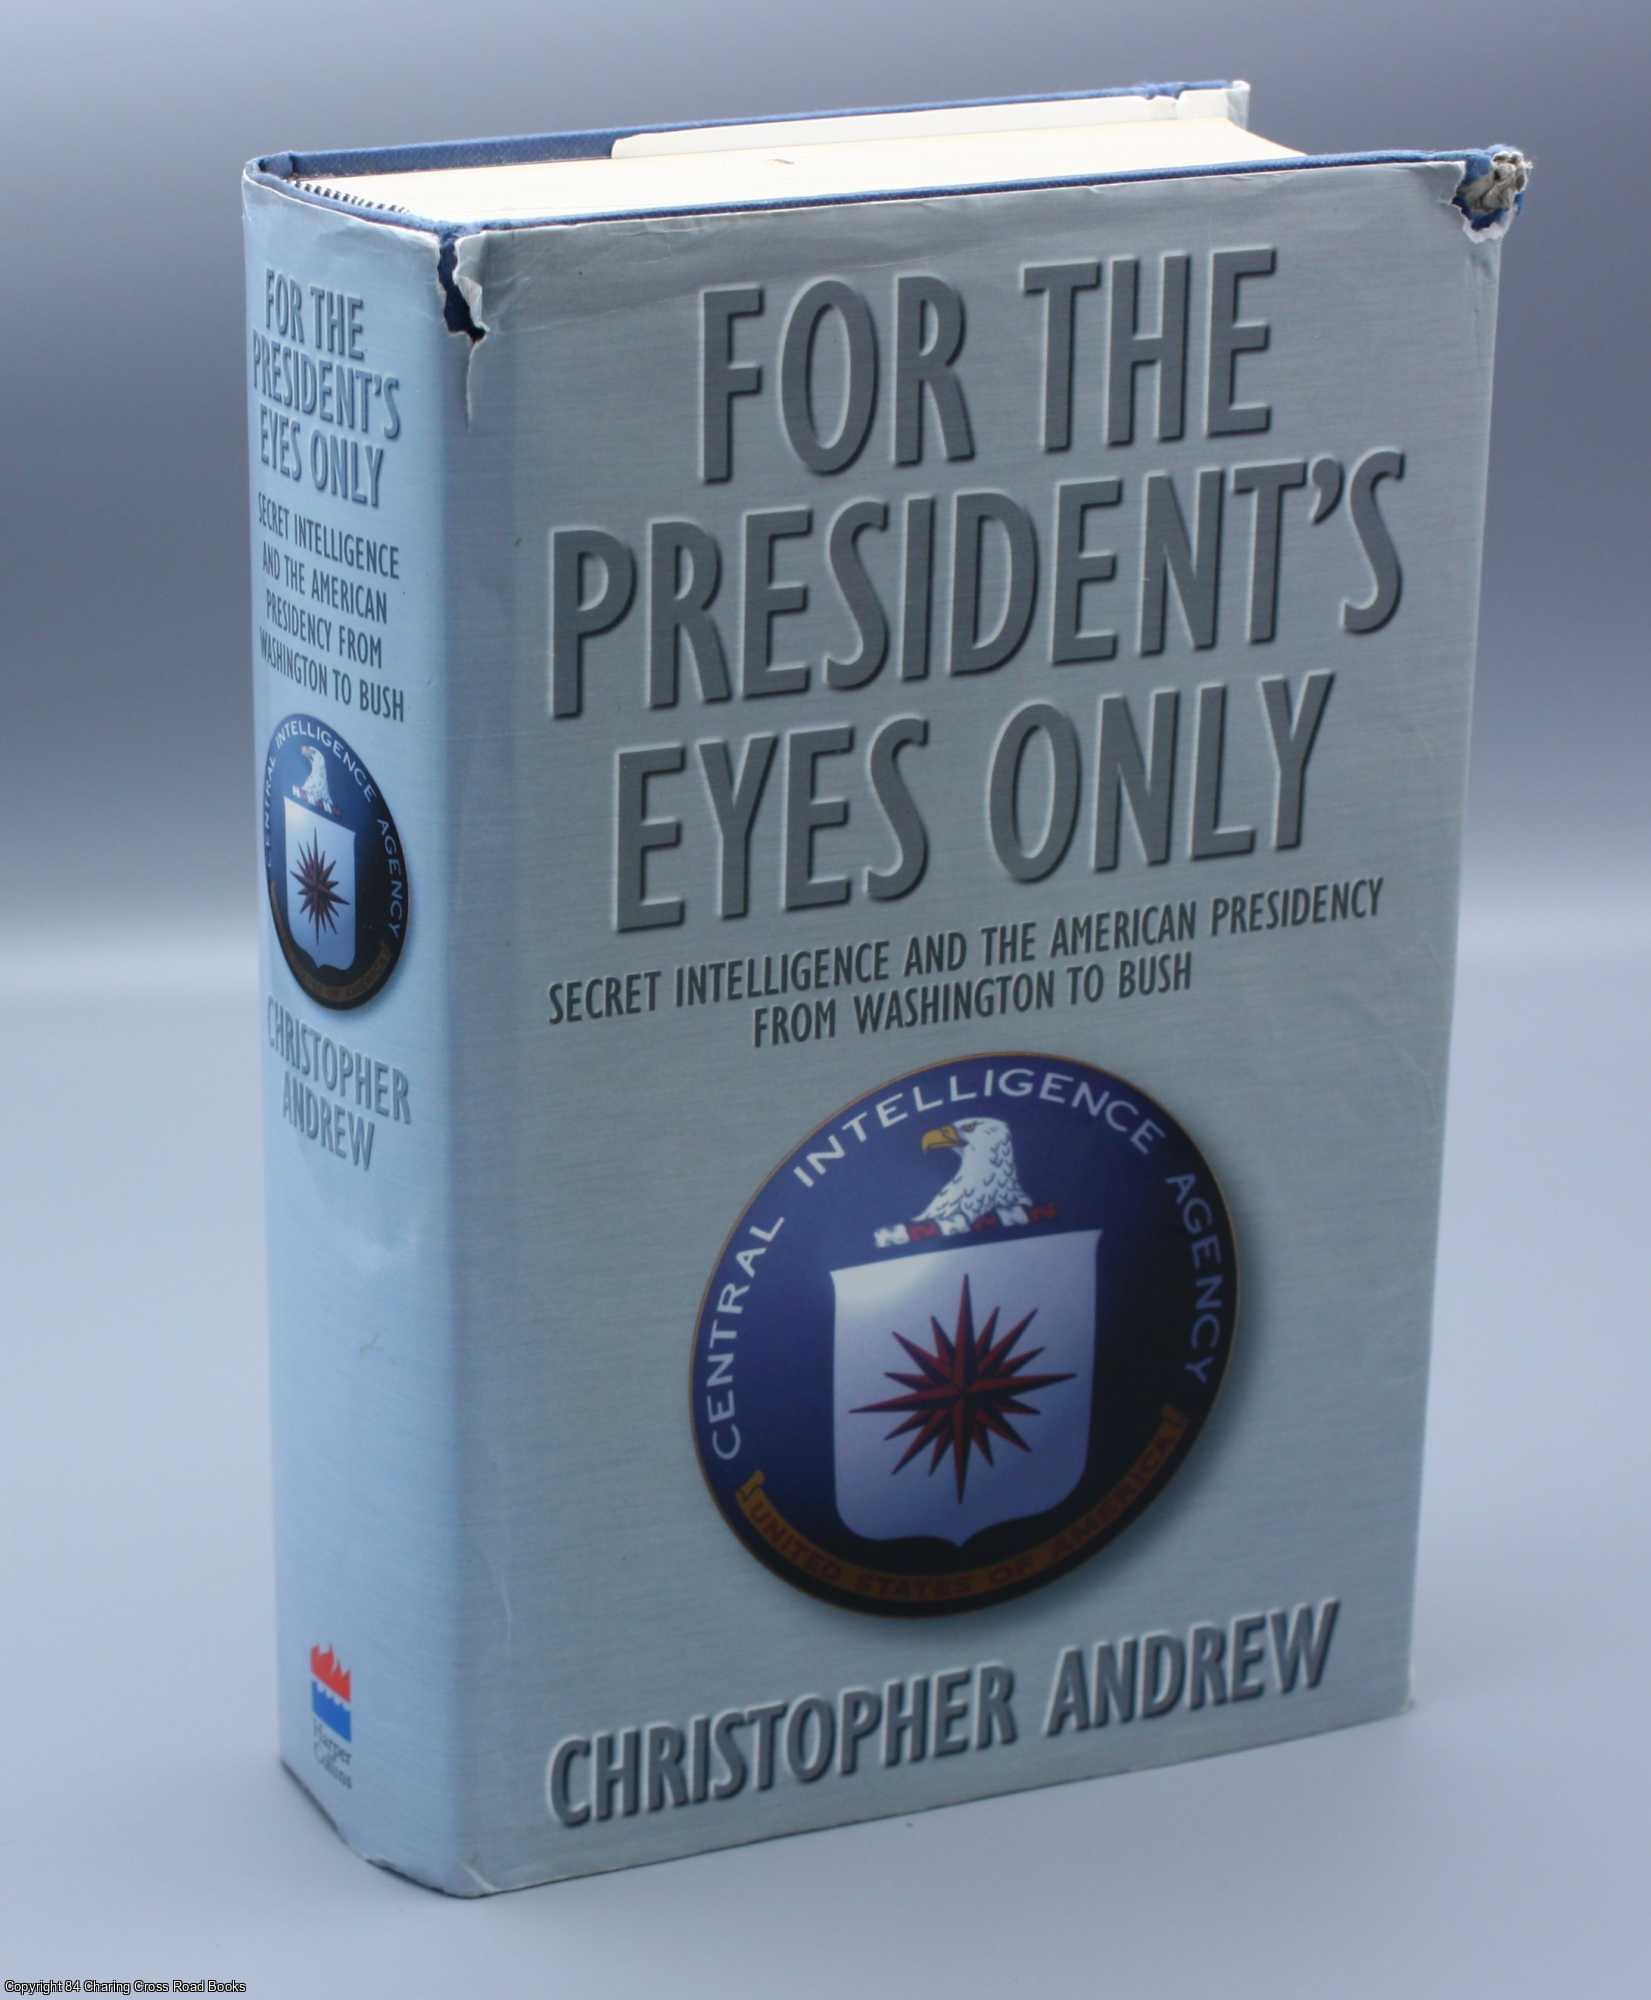 Andrew, Christopher - For the Presidents Eyes Only: Secret Intelligence: Secret Intelligence and the American Presidency from Washington to Bush